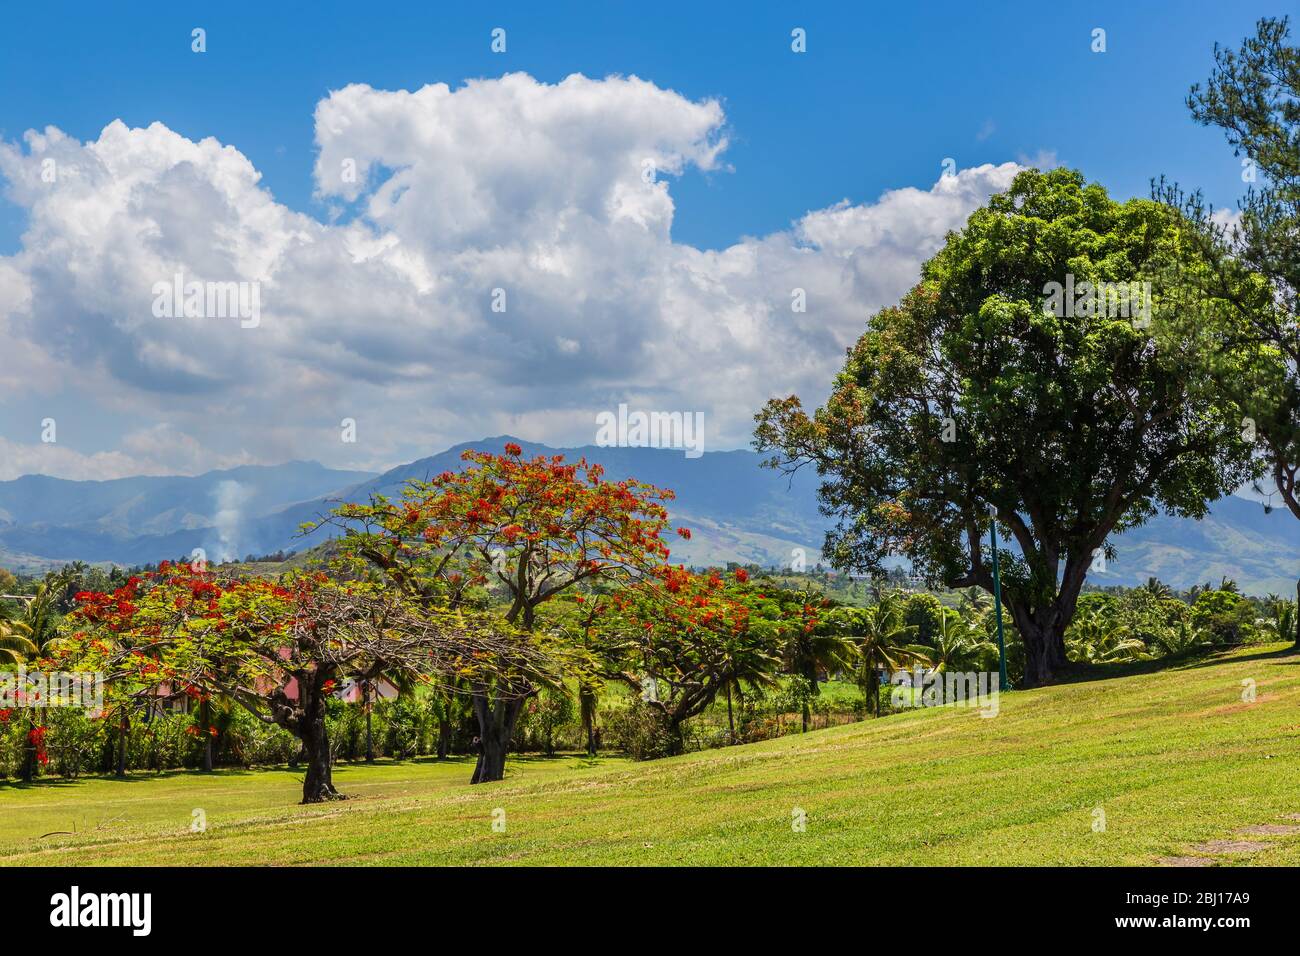 Landscape view of the countryside in Fiji, showing the red flowering Delonix regia, a species of flowering plant in the bean family Fabaceae. Stock Photo